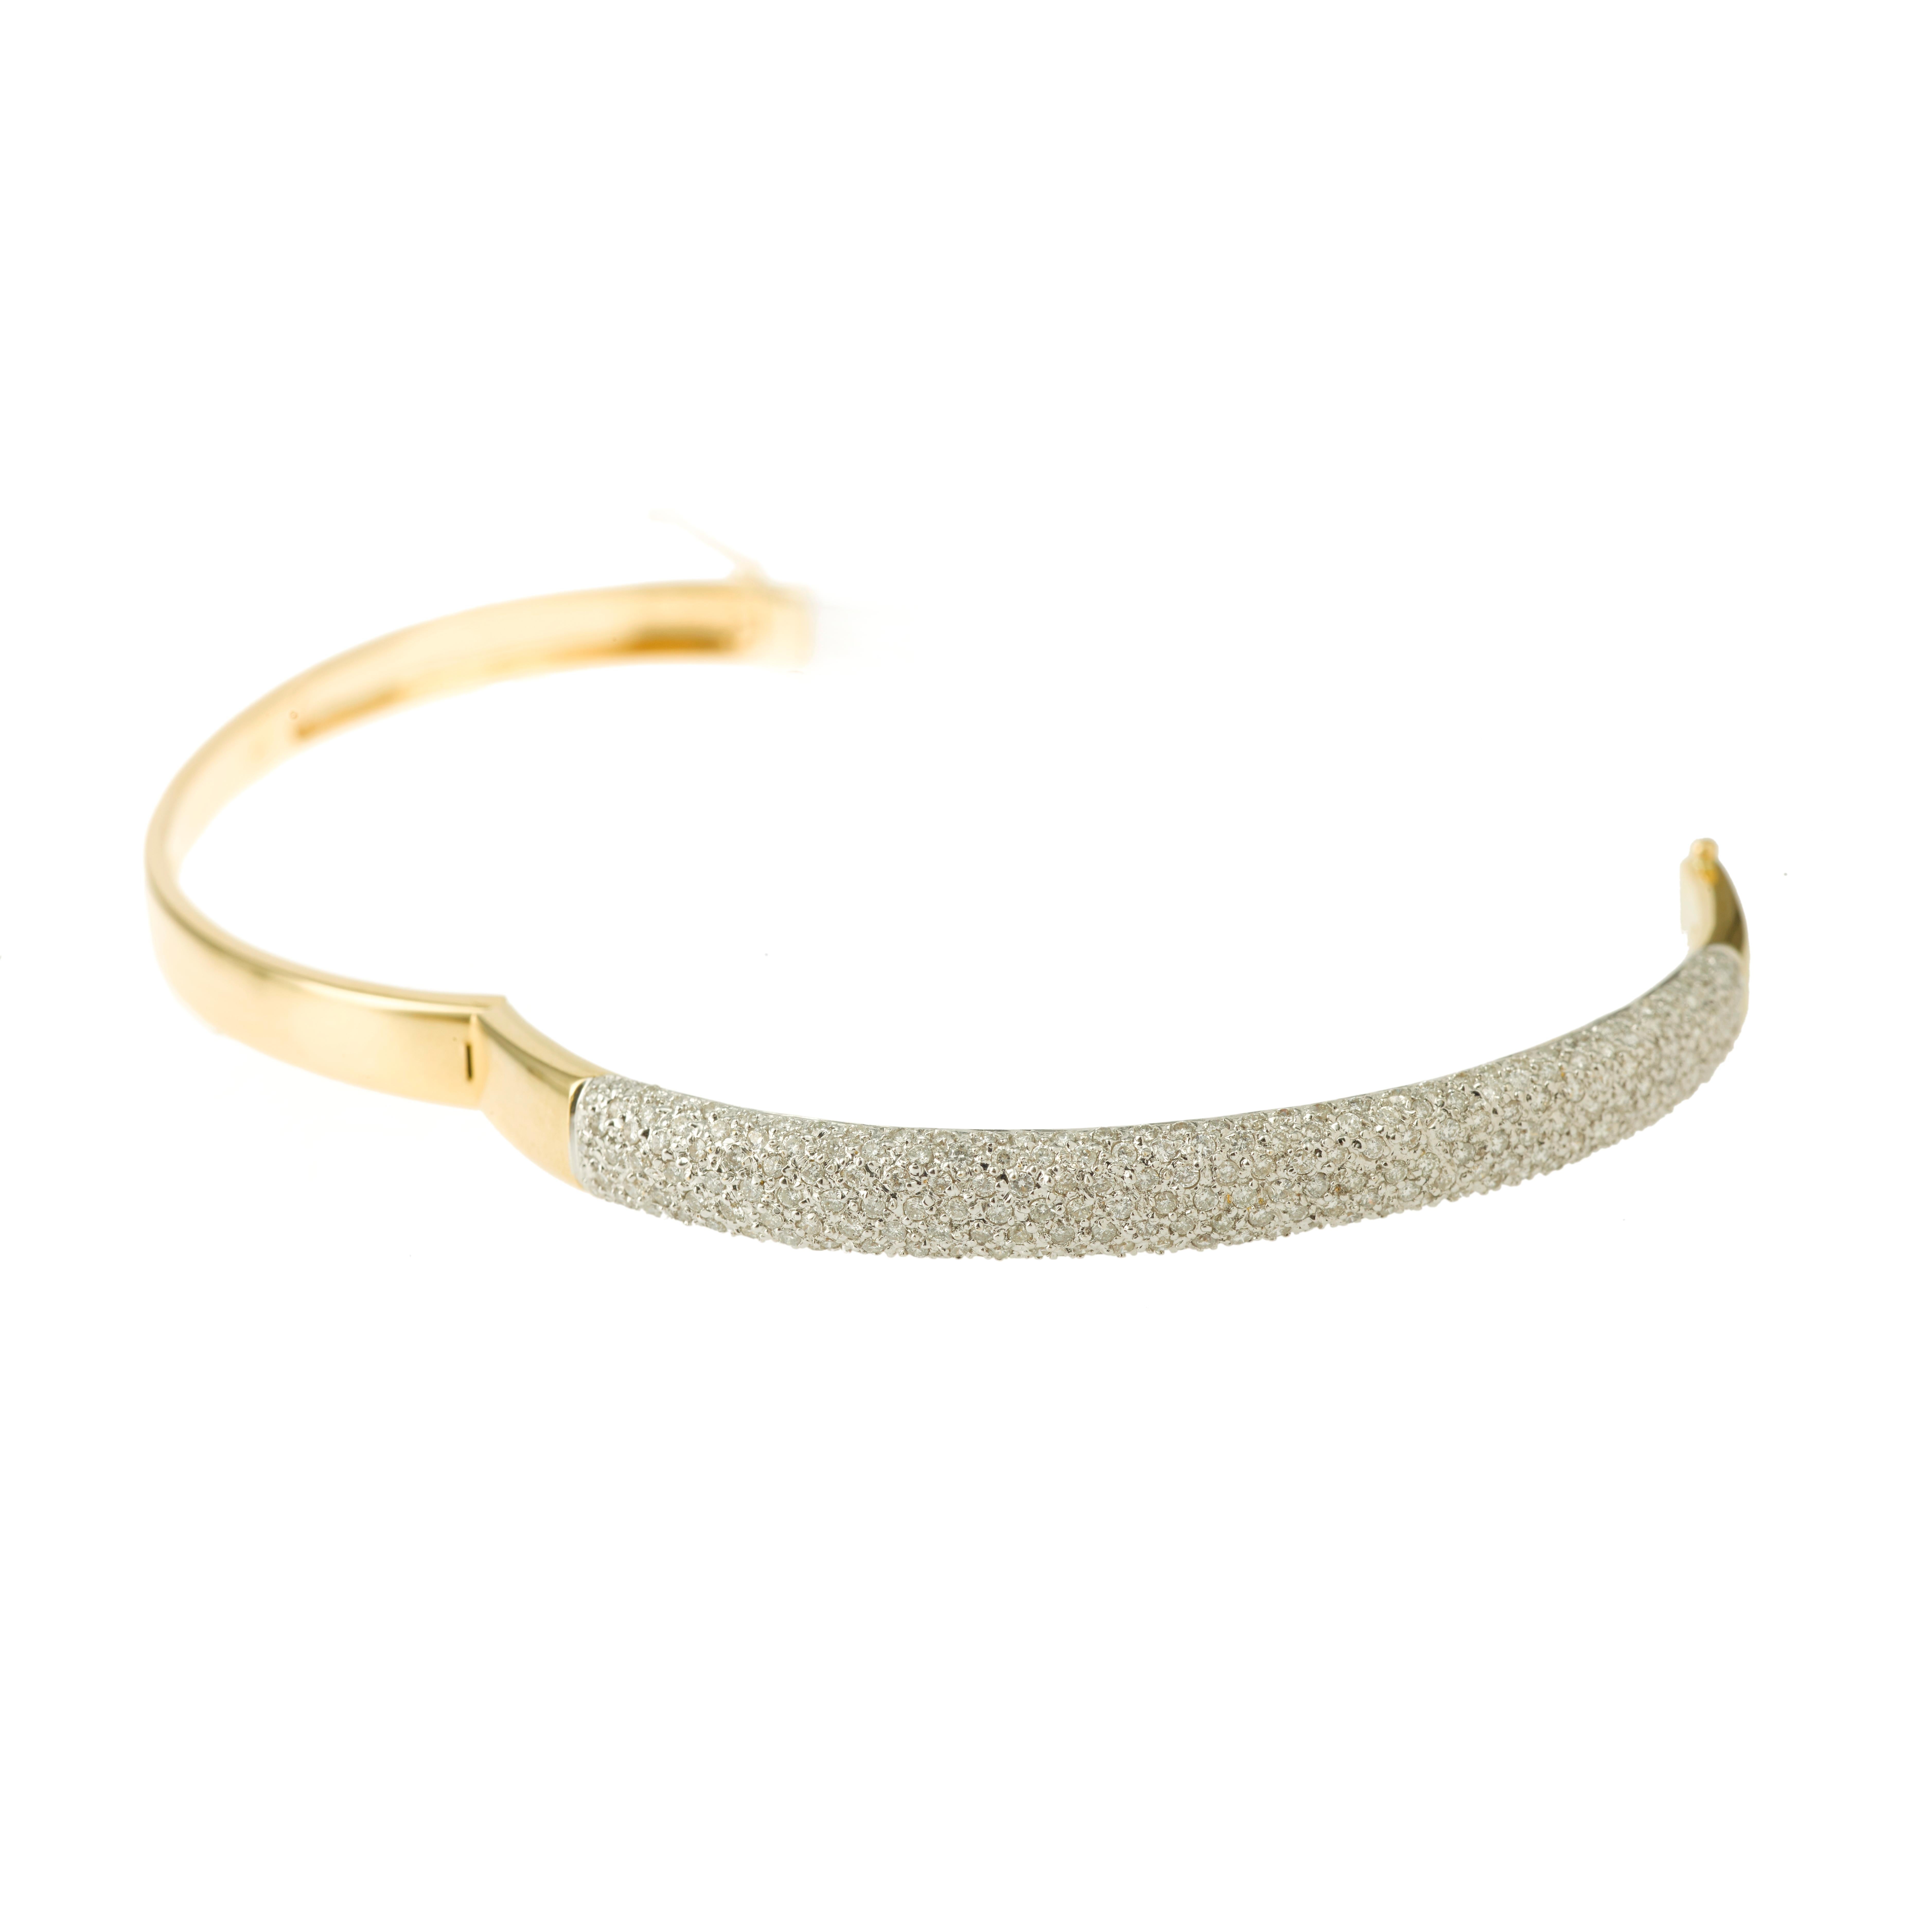 A nice and elegant Yellow gold bangle bracelet set with a pave of 250 brilliant cut diamonds.

Yellow Gold 18 Carats, 750 / 1000th

Total Weight of Diamonds: 1.25 carats

Width: 65 mm / 2.55 inches

Wrist: 19 cm /7.48 inches

Second Hand but perfect